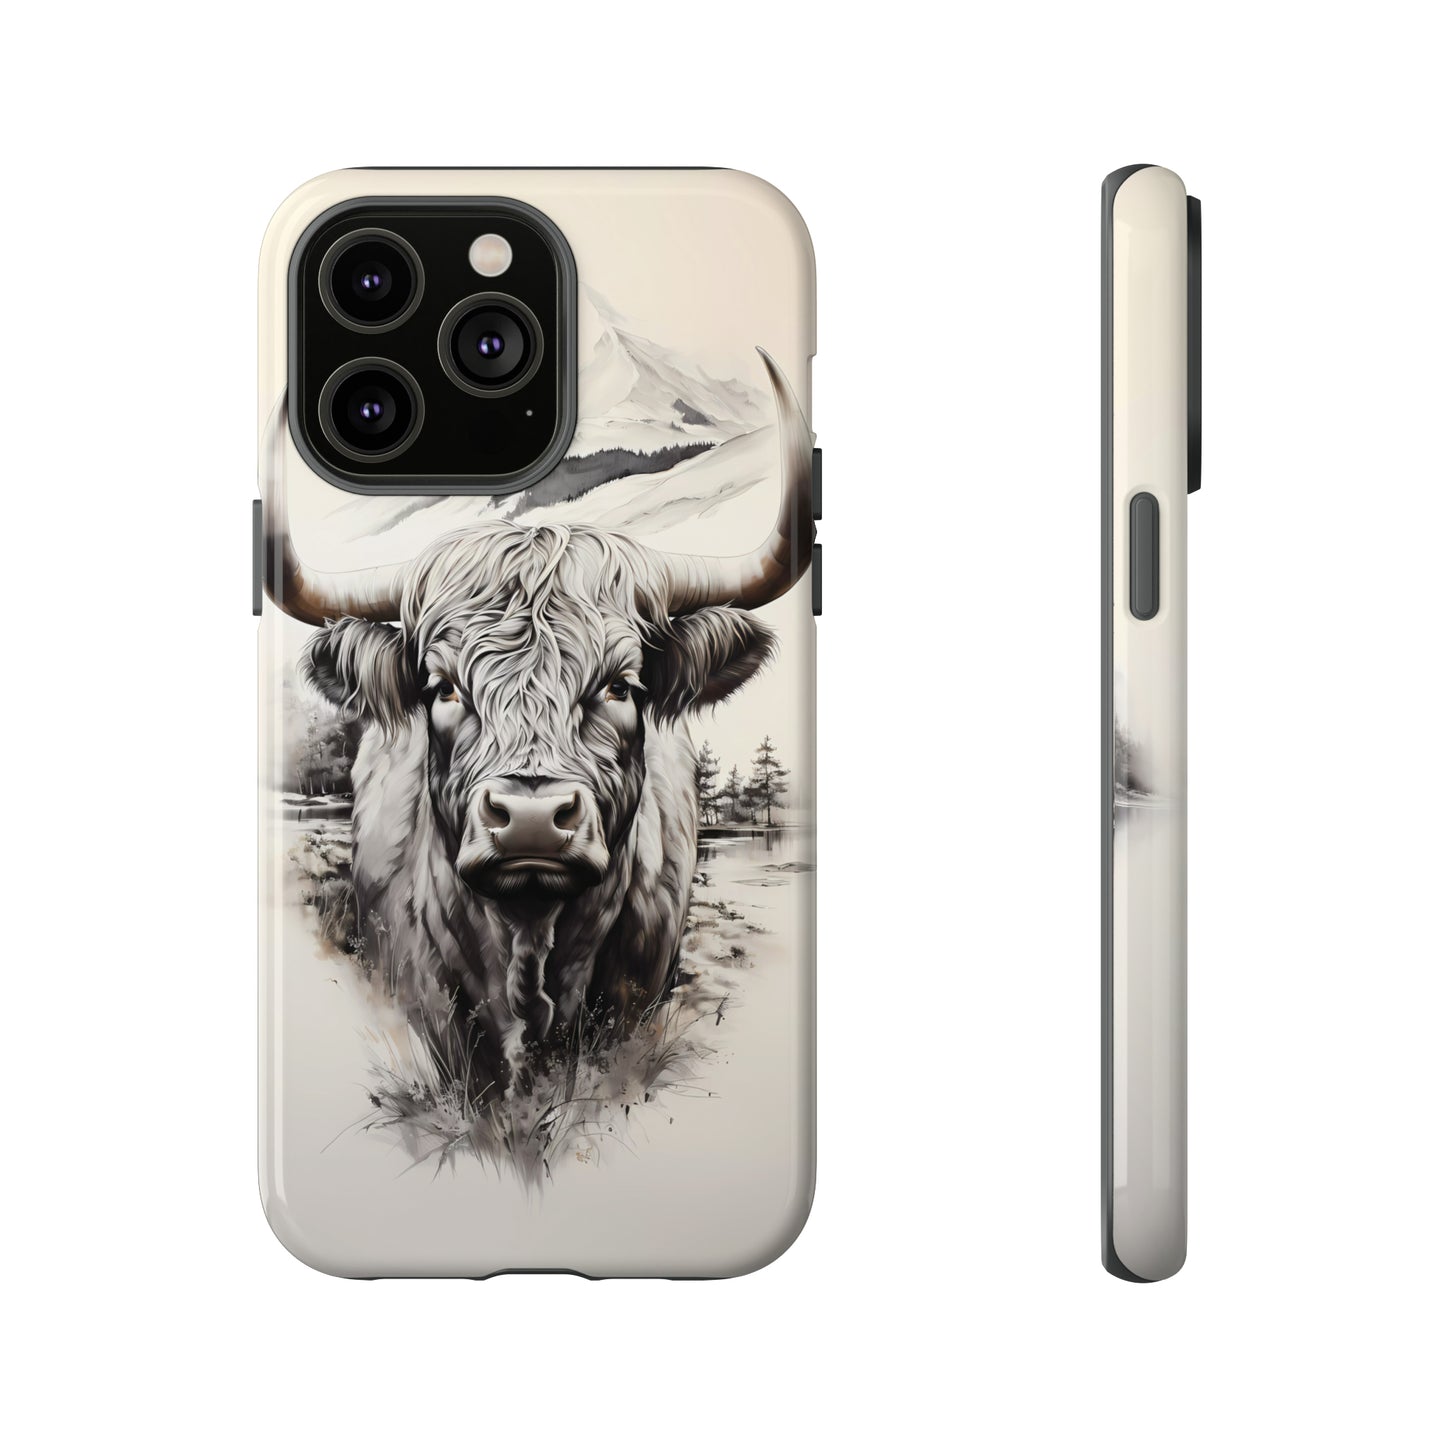 Western iPhone Samsung Phone Cases, Highland Cow In Serene Mountain Scene, Durable Protective Case Like No Other, Built Farmhouse Tough!